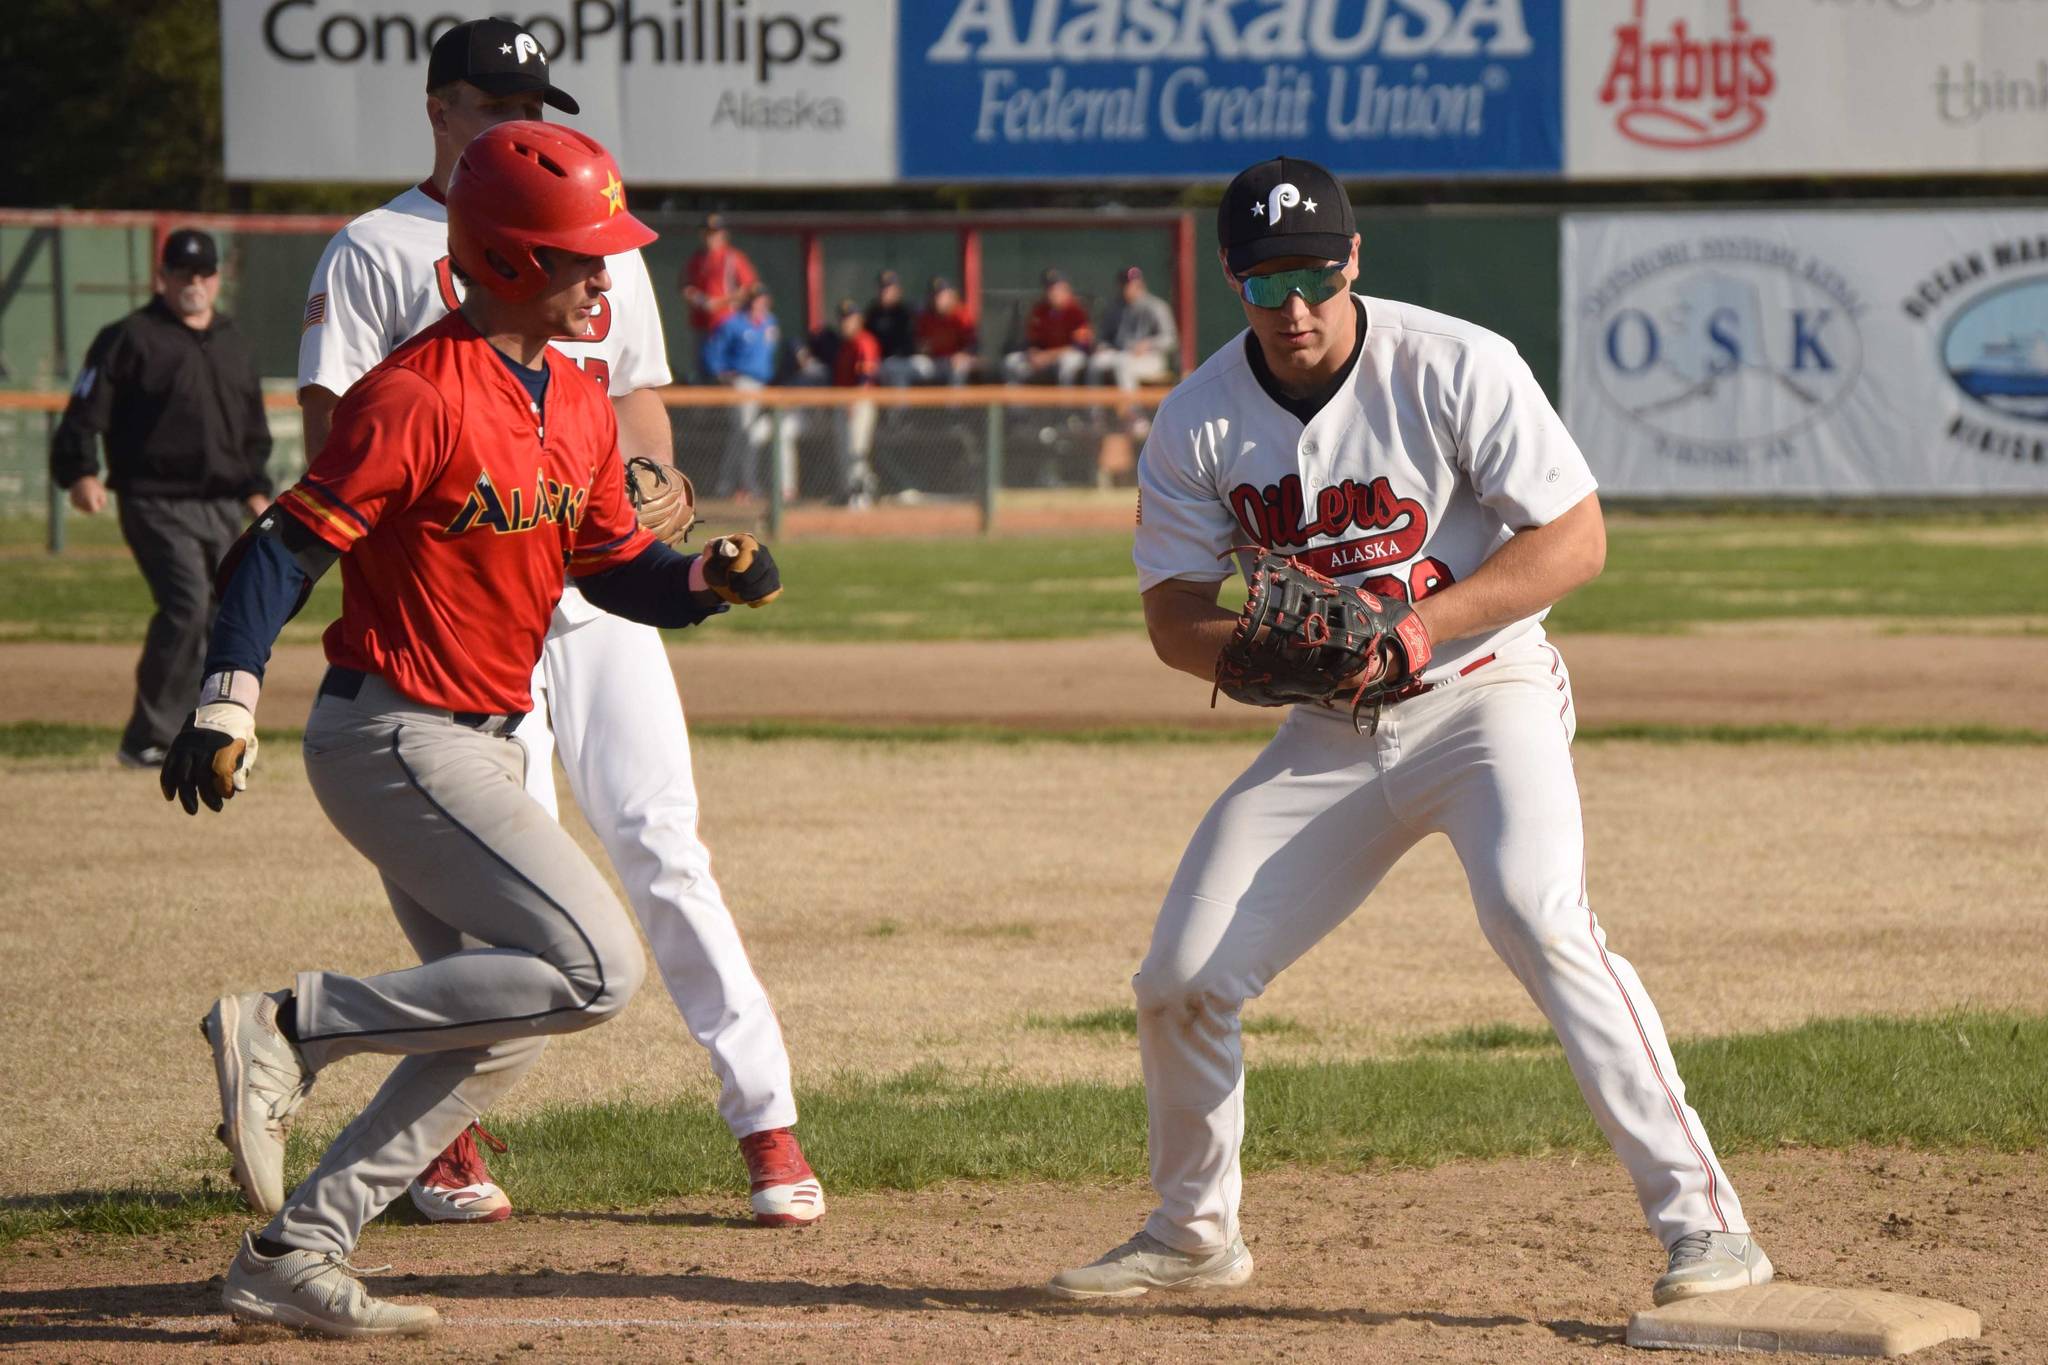 Peninsula Oilers first baseman Cole Hage forces out Marco Pirruccello of the Alaska Goldpanners of Fairbanks on Monday, June 7, 2021, at Coral Seymour Memorial Park in Kenai, Alaska. (Photo by Jeff Helminiak/Peninsula Clarion)